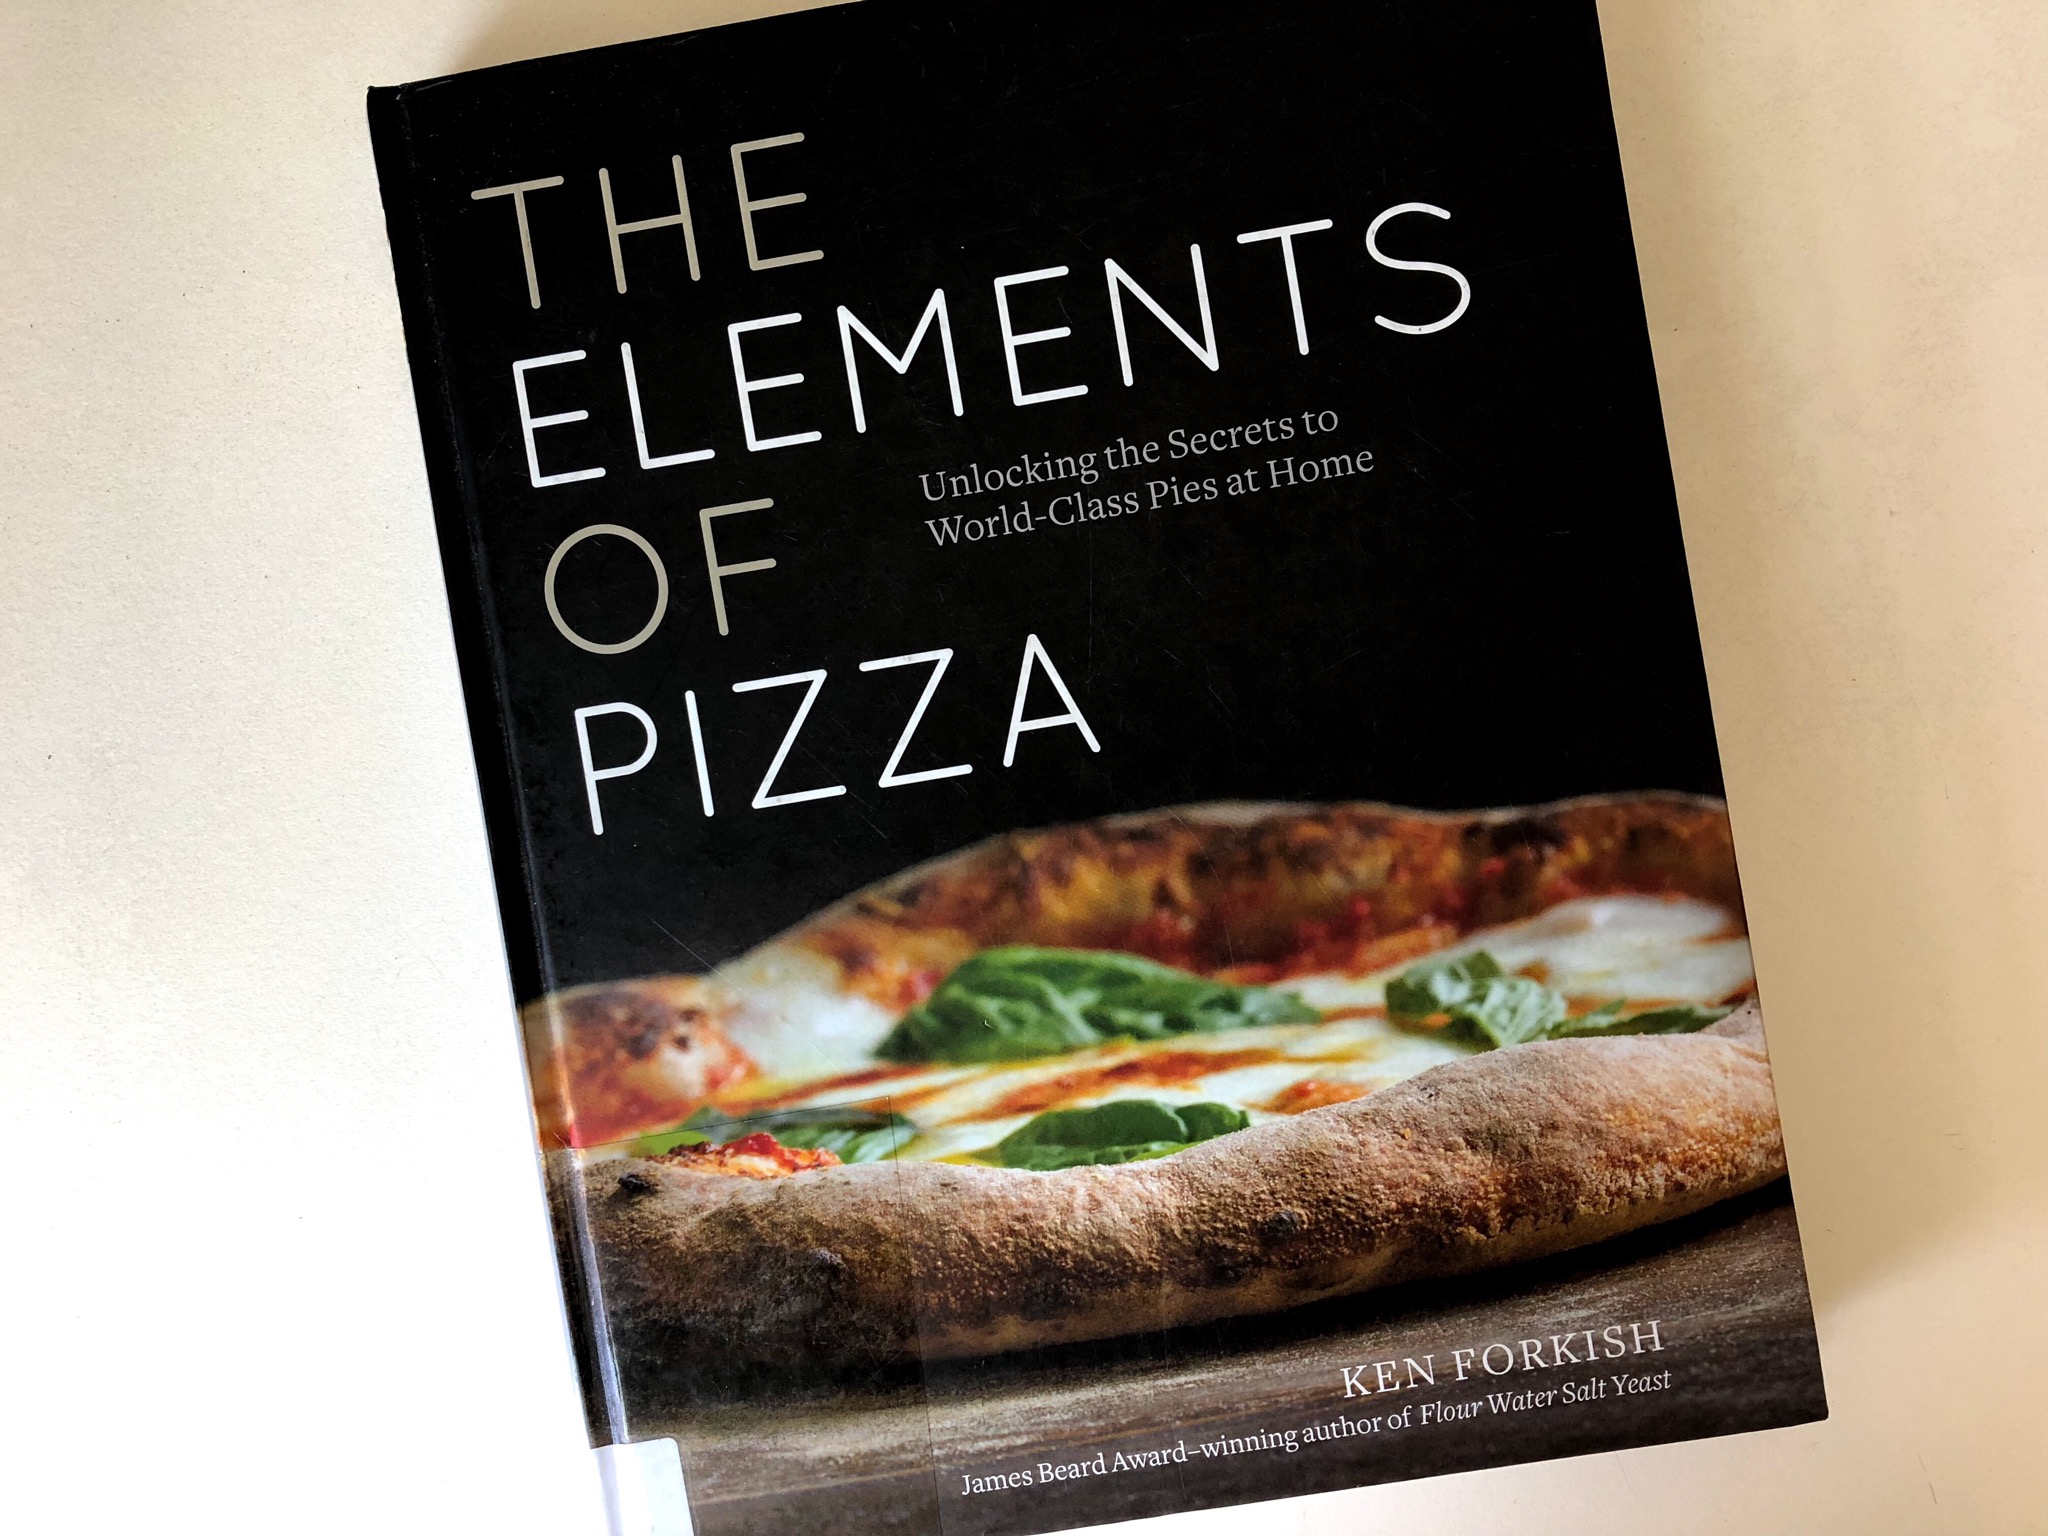 The Elements of Pizza cookbook